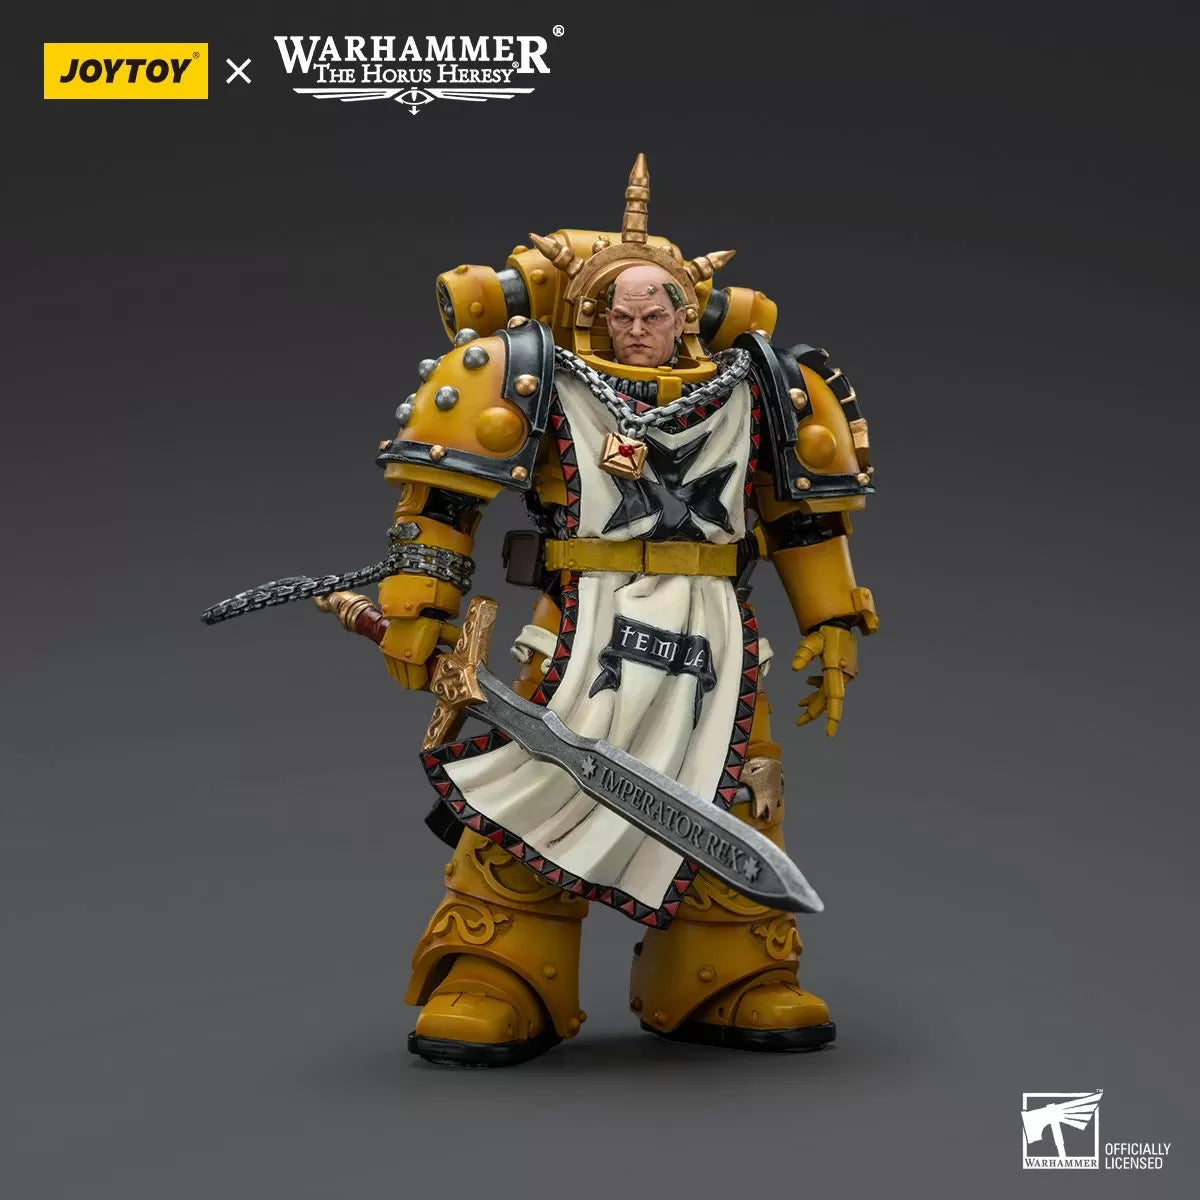 Warhammer Collectibles: 1/18 Scale Imperial Fists Sigismund, First Captain of the Imperial Fists - Preorder